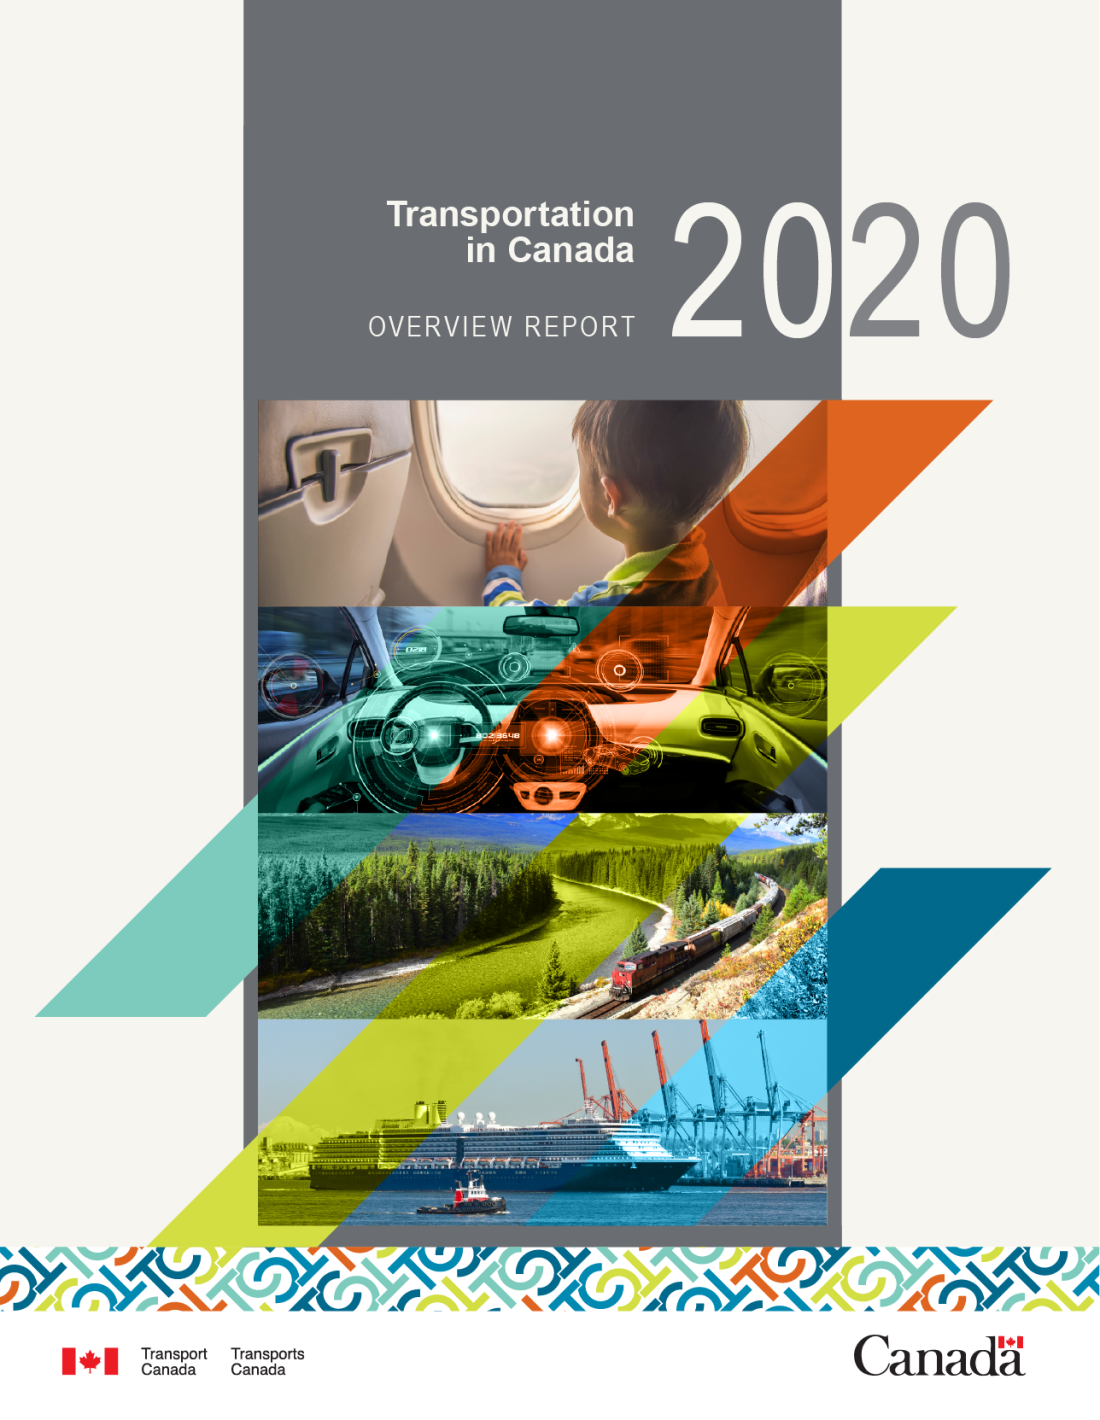 Image - Transportation in Canada 2020 - Overview Report